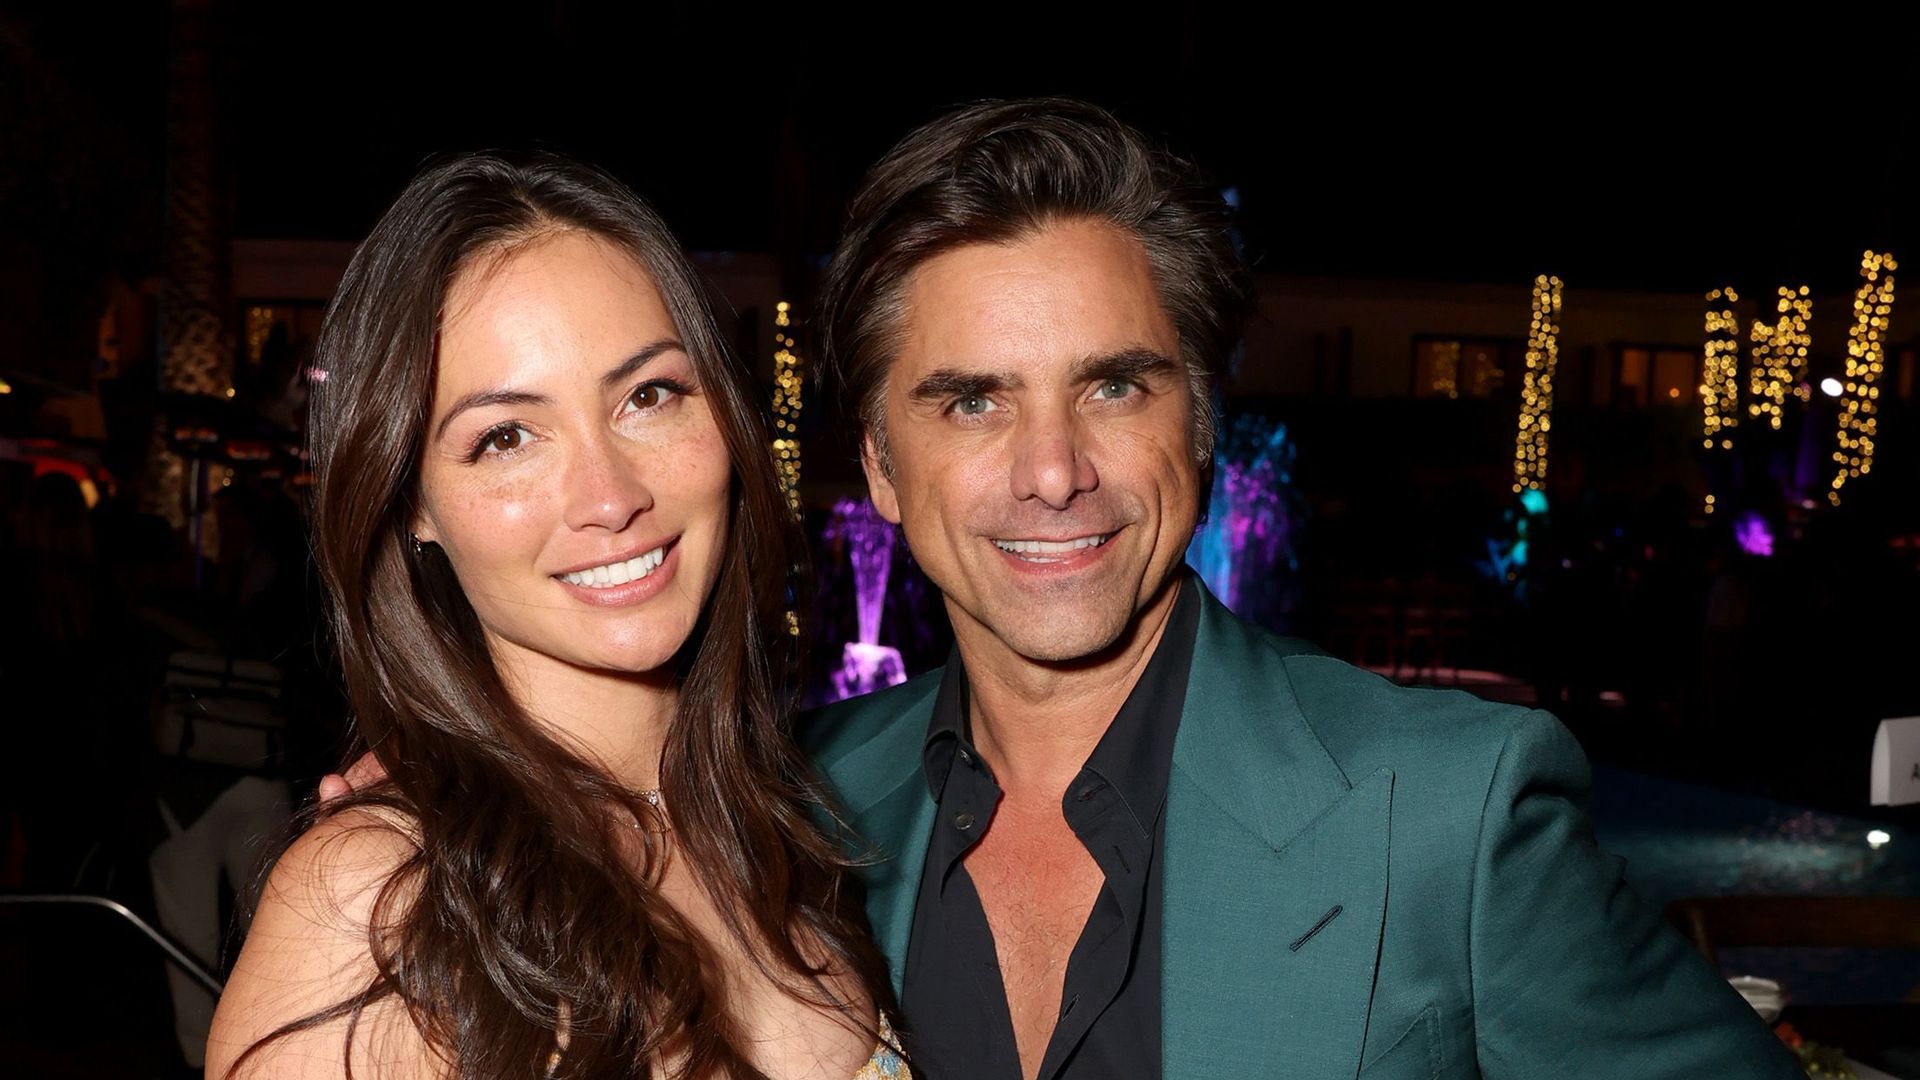 Caitlin McHugh and John Stamos attend the World Premiere of Disney's live-action feature "The Little Mermaid" at the Dolby Theatre in Los Angeles, California on May 08, 2023